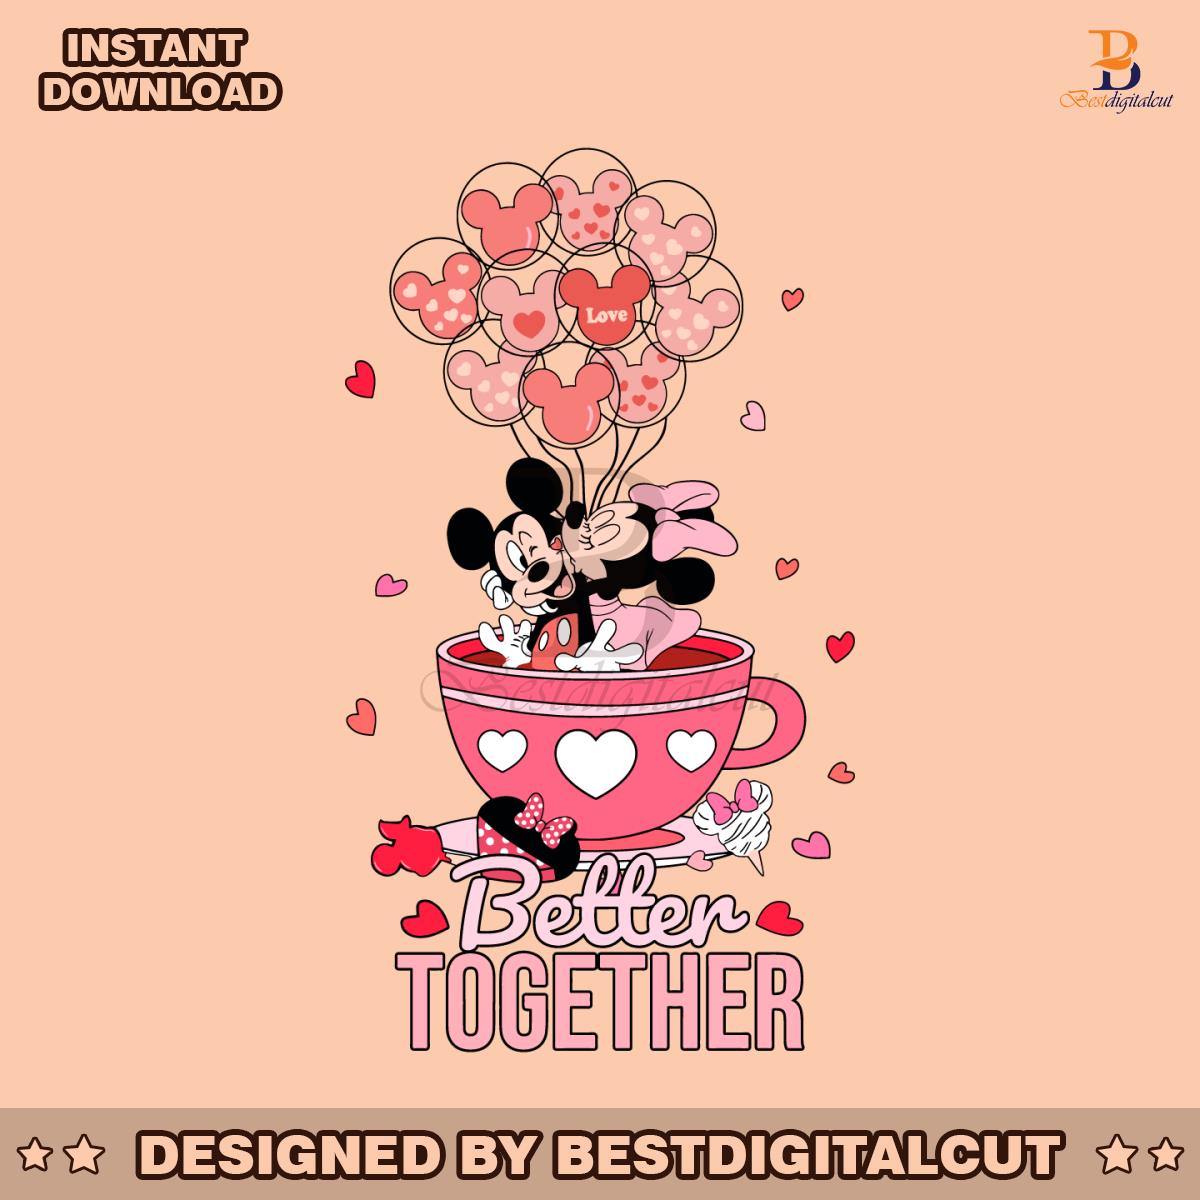 disney-mickey-balloons-better-together-svg